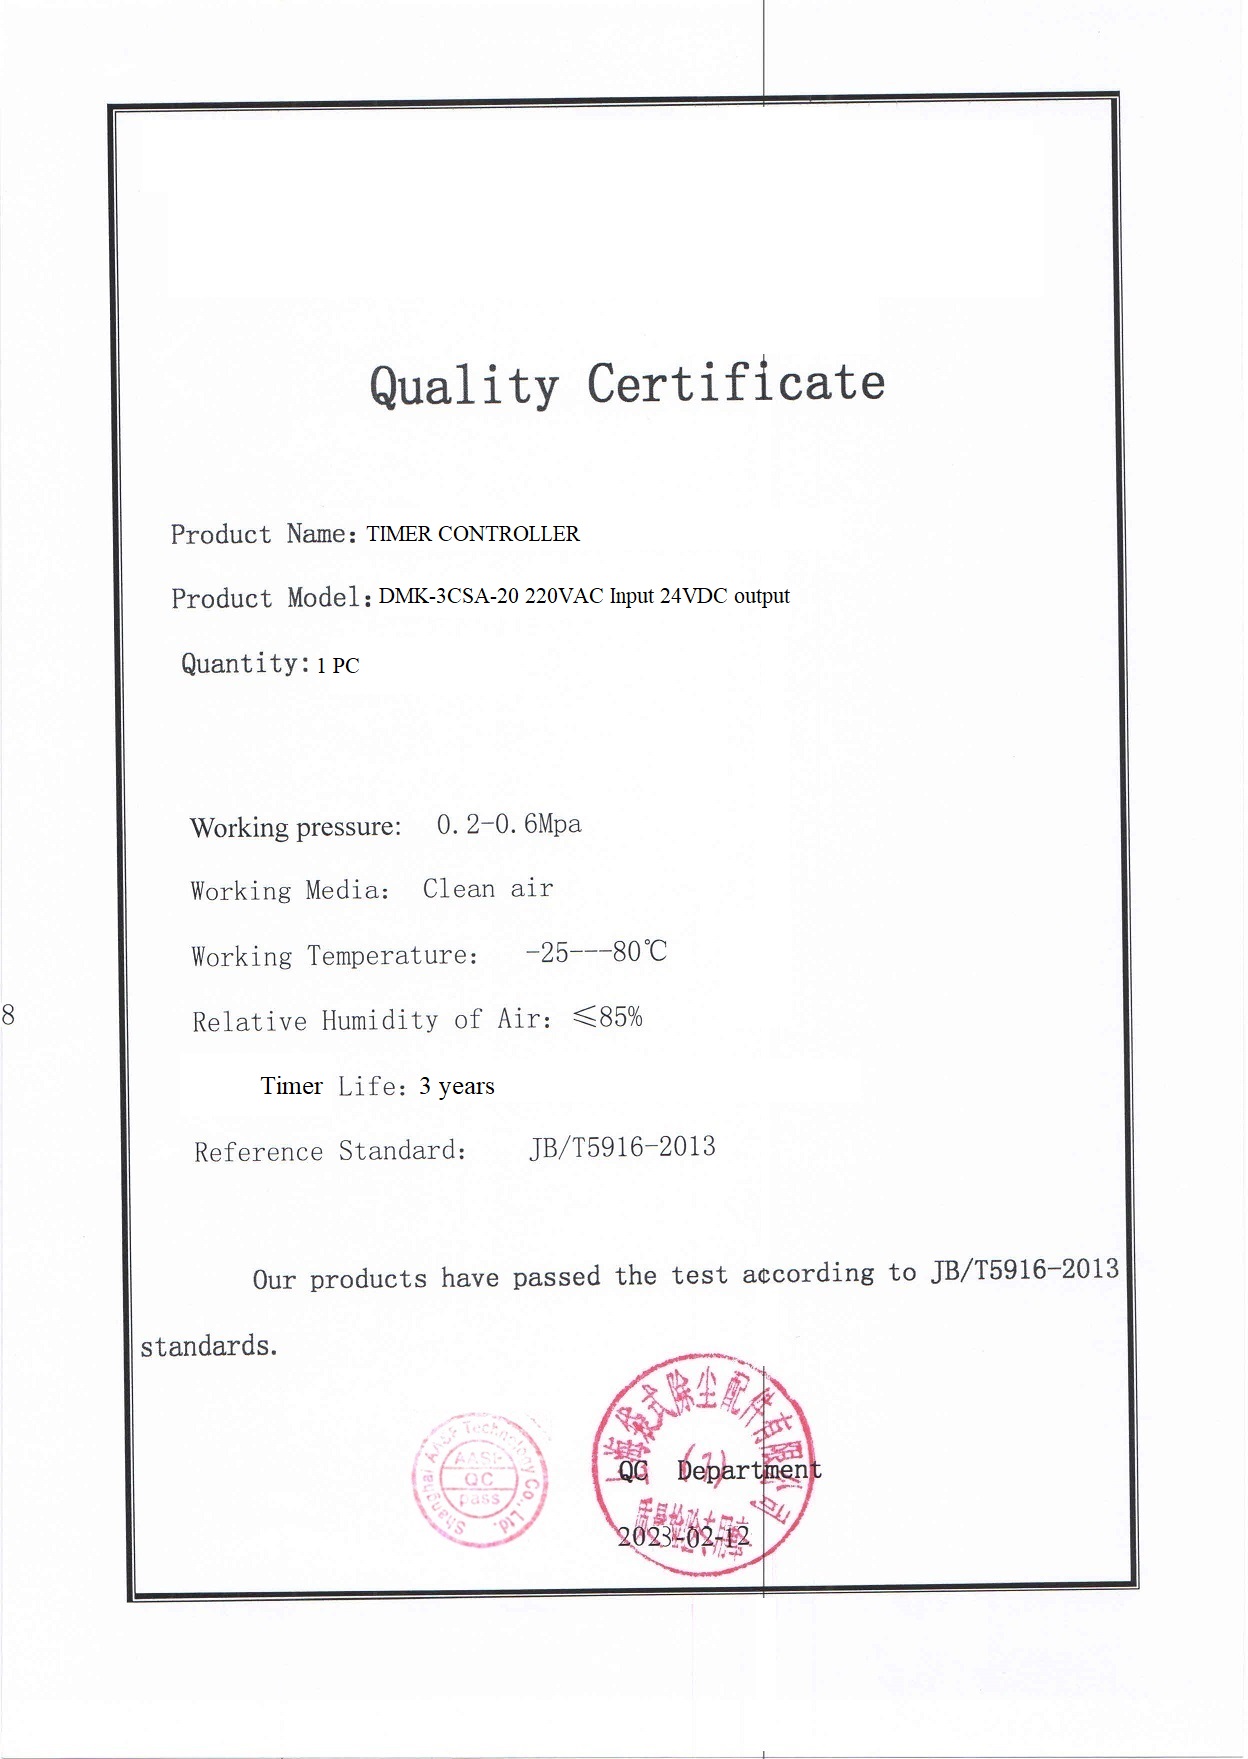 testing quality certificate 2023